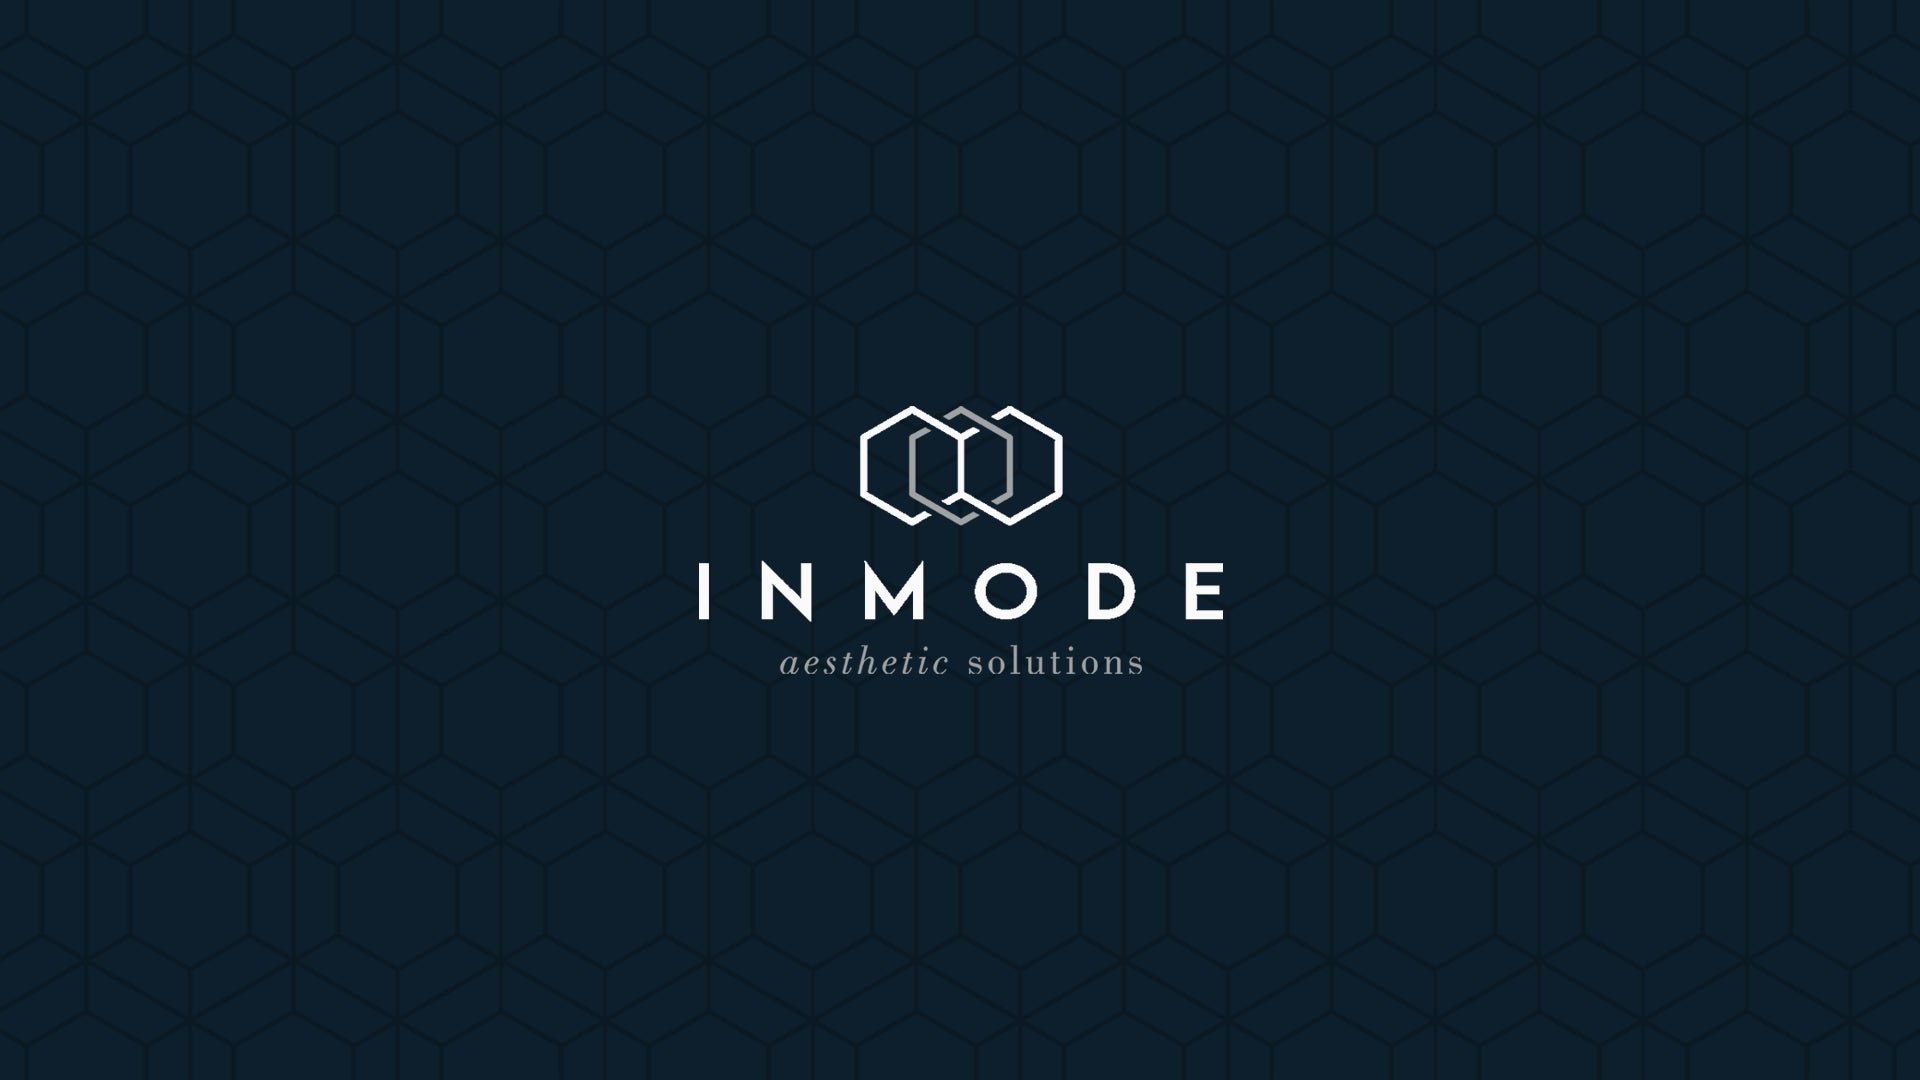 InMode supports the Aesthetic Industry. Message from Dennis Cronje, Managing Director